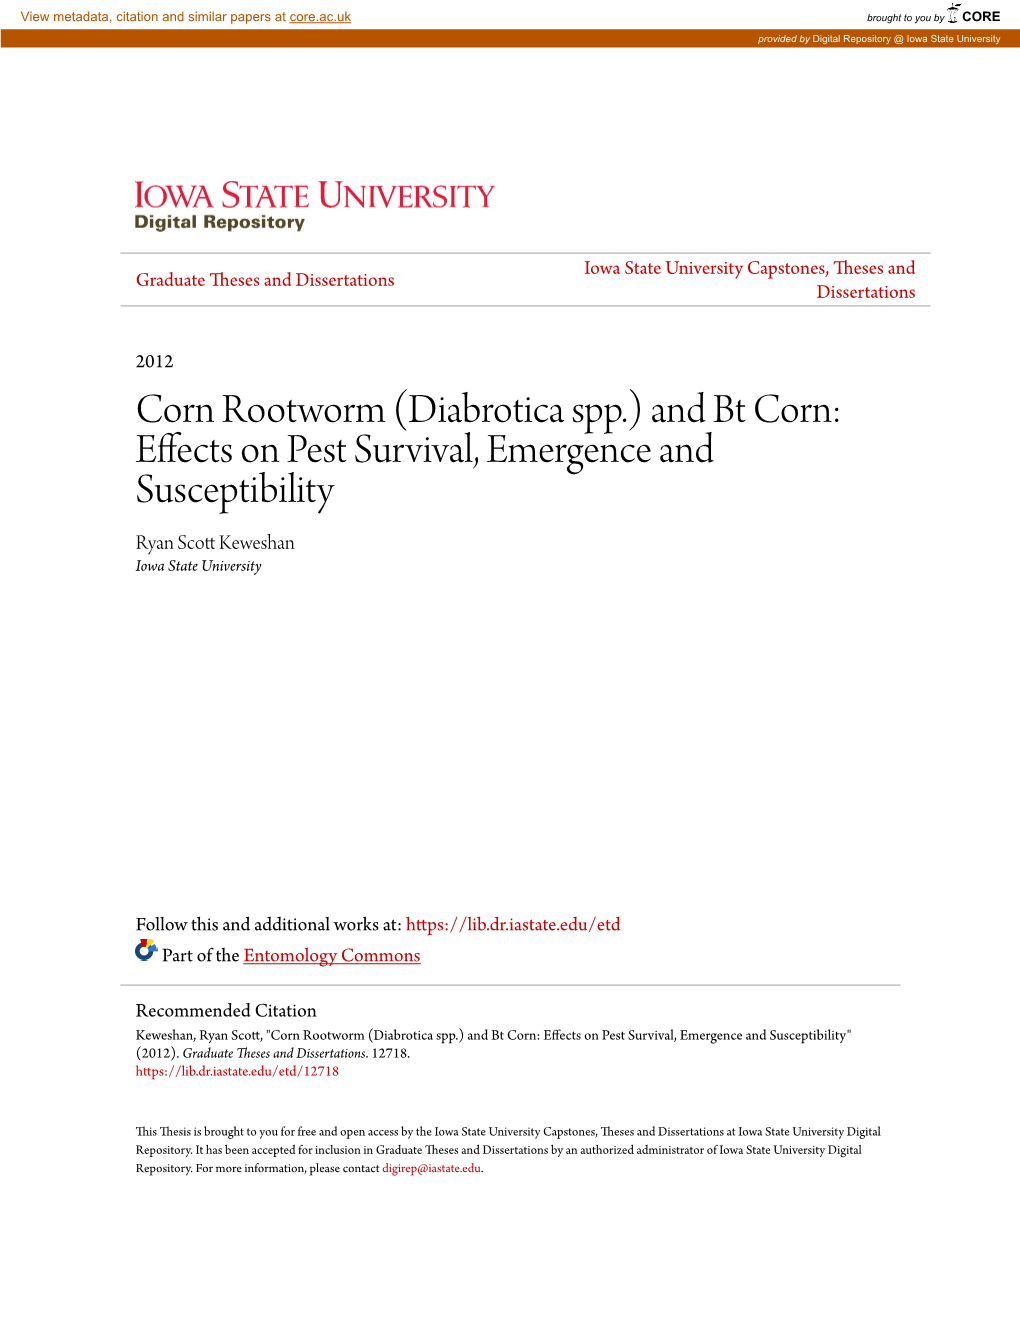 Corn Rootworm (Diabrotica Spp.) and Bt Corn: Effects on Pest Survival, Emergence and Susceptibility Ryan Scott Keweshan Iowa State University